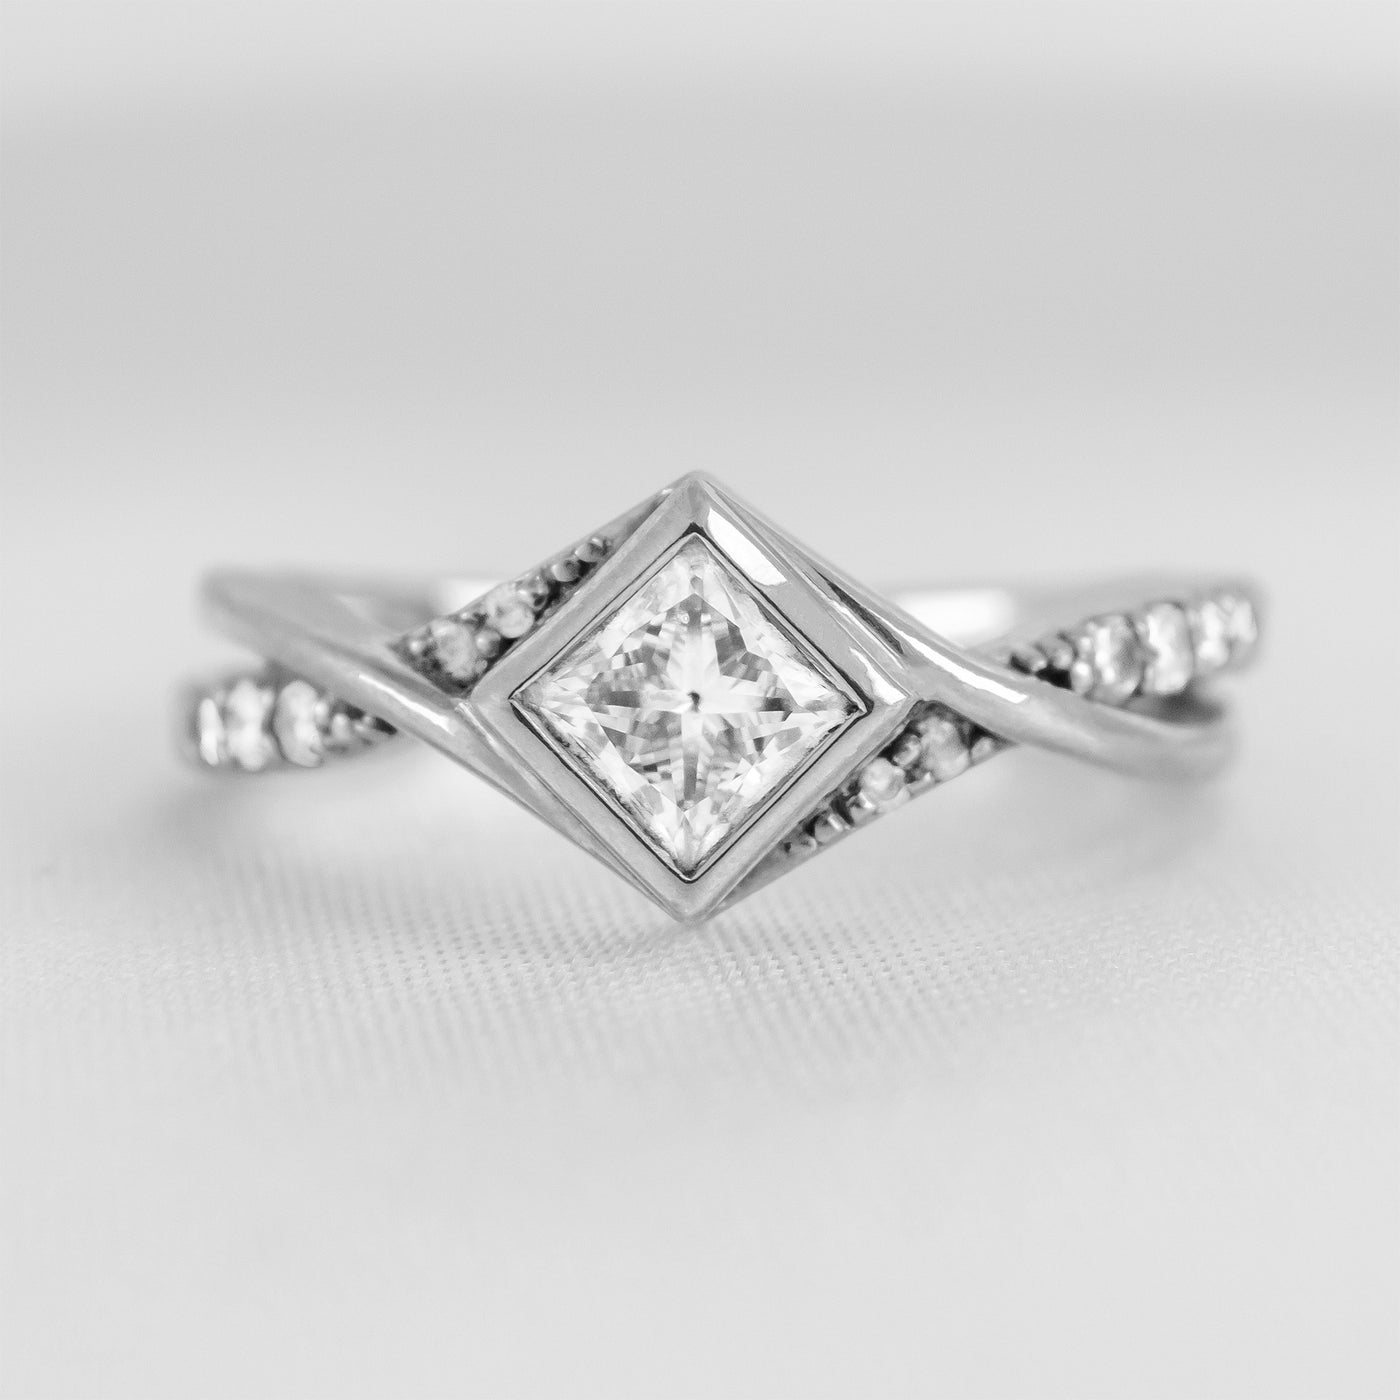 Show in 1 Carat * The Oakley Twist Princess Cut Diamond Engagement Ring | Lisa Robin#color_14k-white-gold